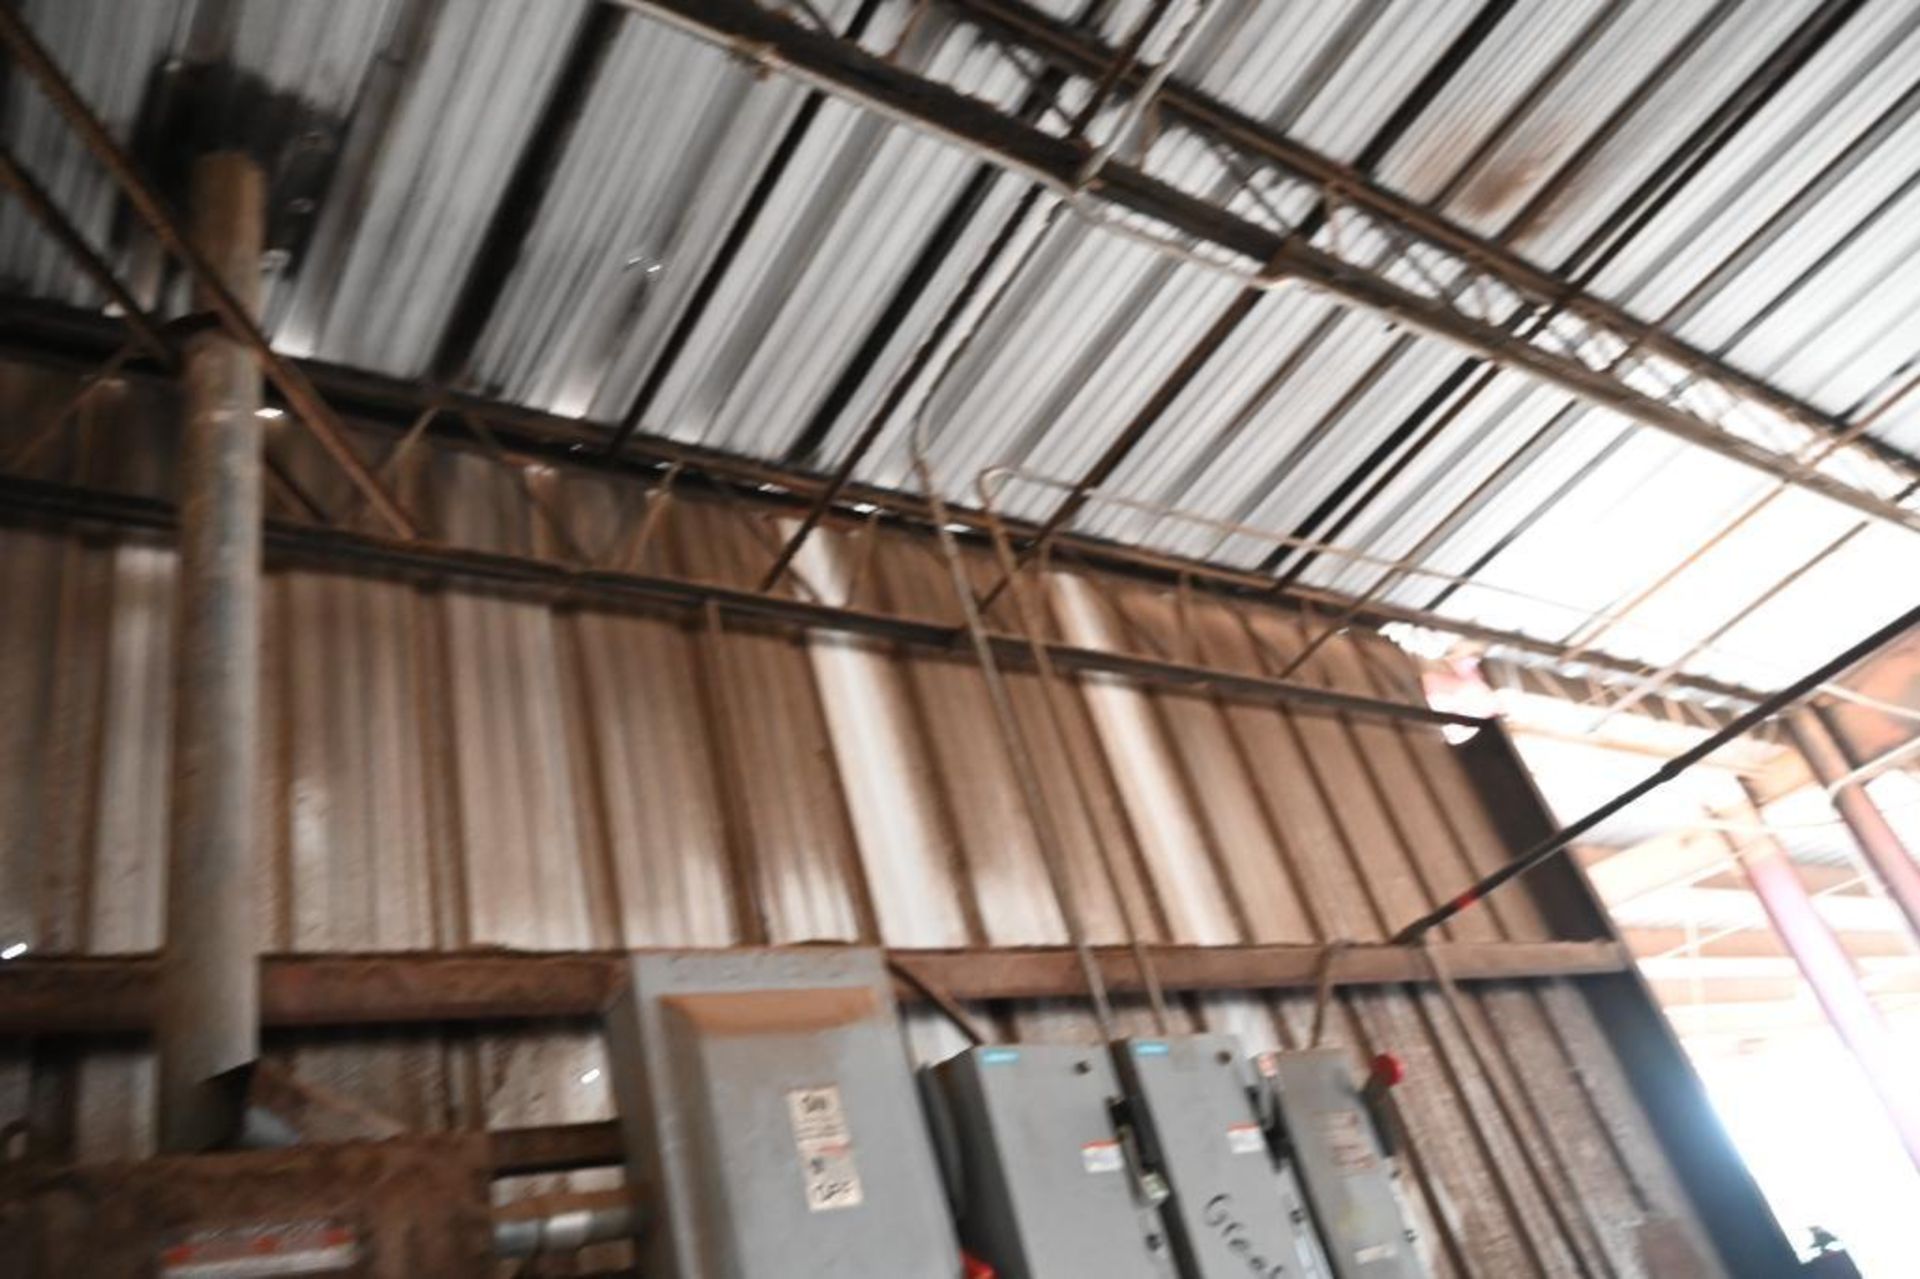 Electrical in Main Sawmill Building - Image 7 of 13